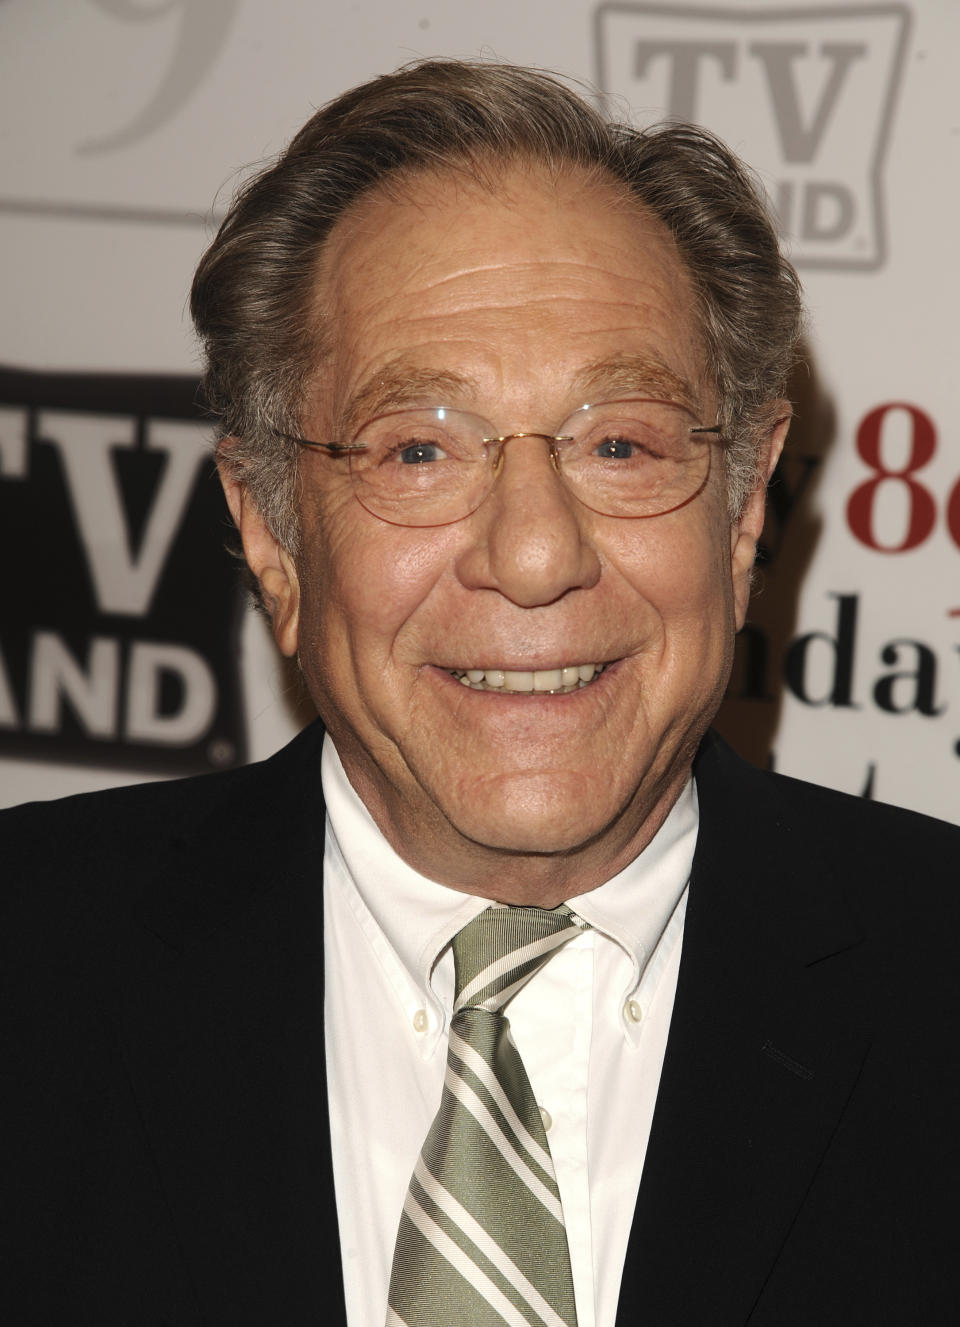 FILE - Actor George Segal attends Betty White's 89th Birthday celebration hosted by TV Land, in New York, on Jan. 18, 2011. Segal, the banjo player turned actor who was nominated for an Oscar for 1966's “Who’s Afraid of Virginia Woolf?,” and starred in the ABC sitcom “The Goldbergs,” died Tuesday, his wife said. He was 87. (AP Photo/Peter Kramer, File)